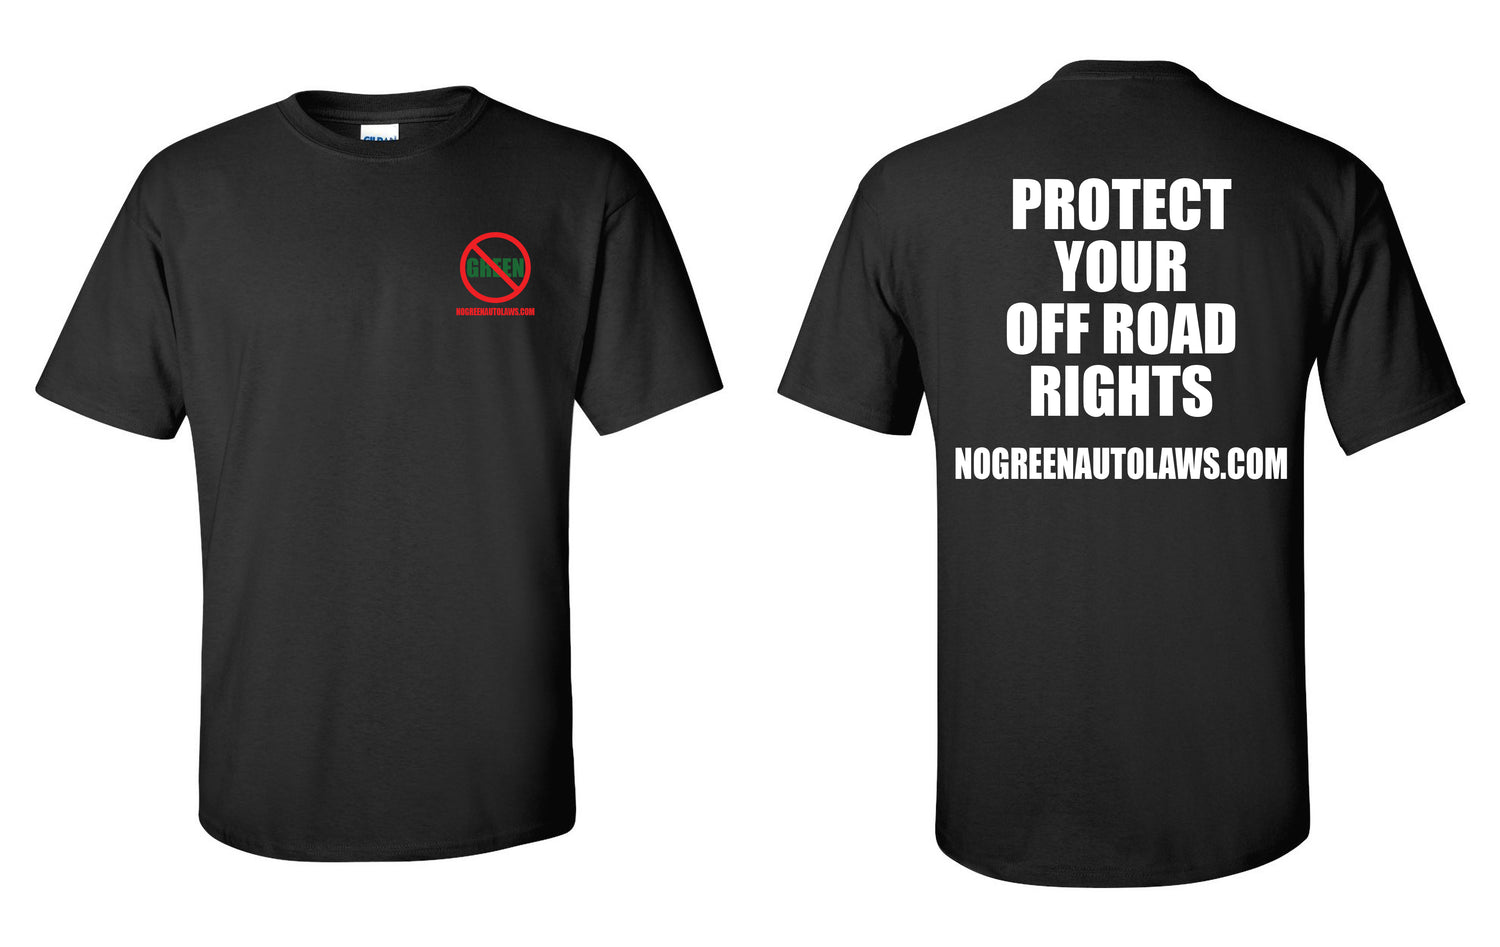 GET ALL PROTECT YOUR OFF ROAD RIGHTS MERCHANDISE HERE!